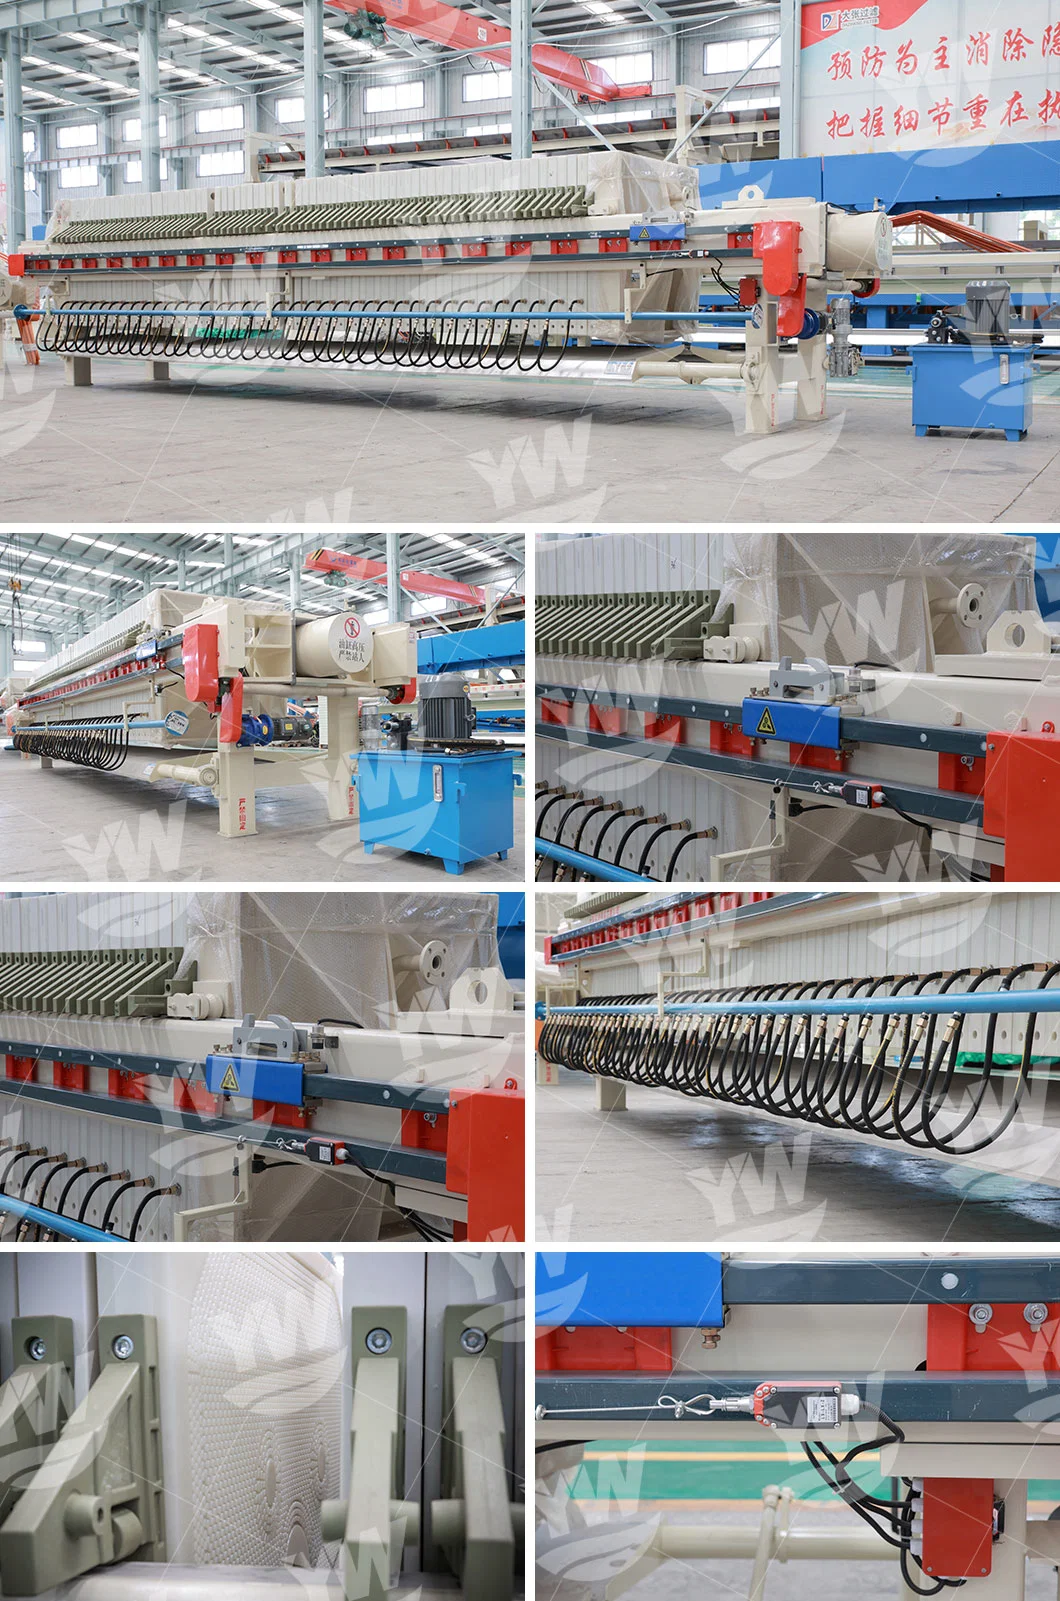 Automatic Membrane Filter Press Manufacturer with Factory Price for Sludge Dewatering Treatment and Wastewater Treatment